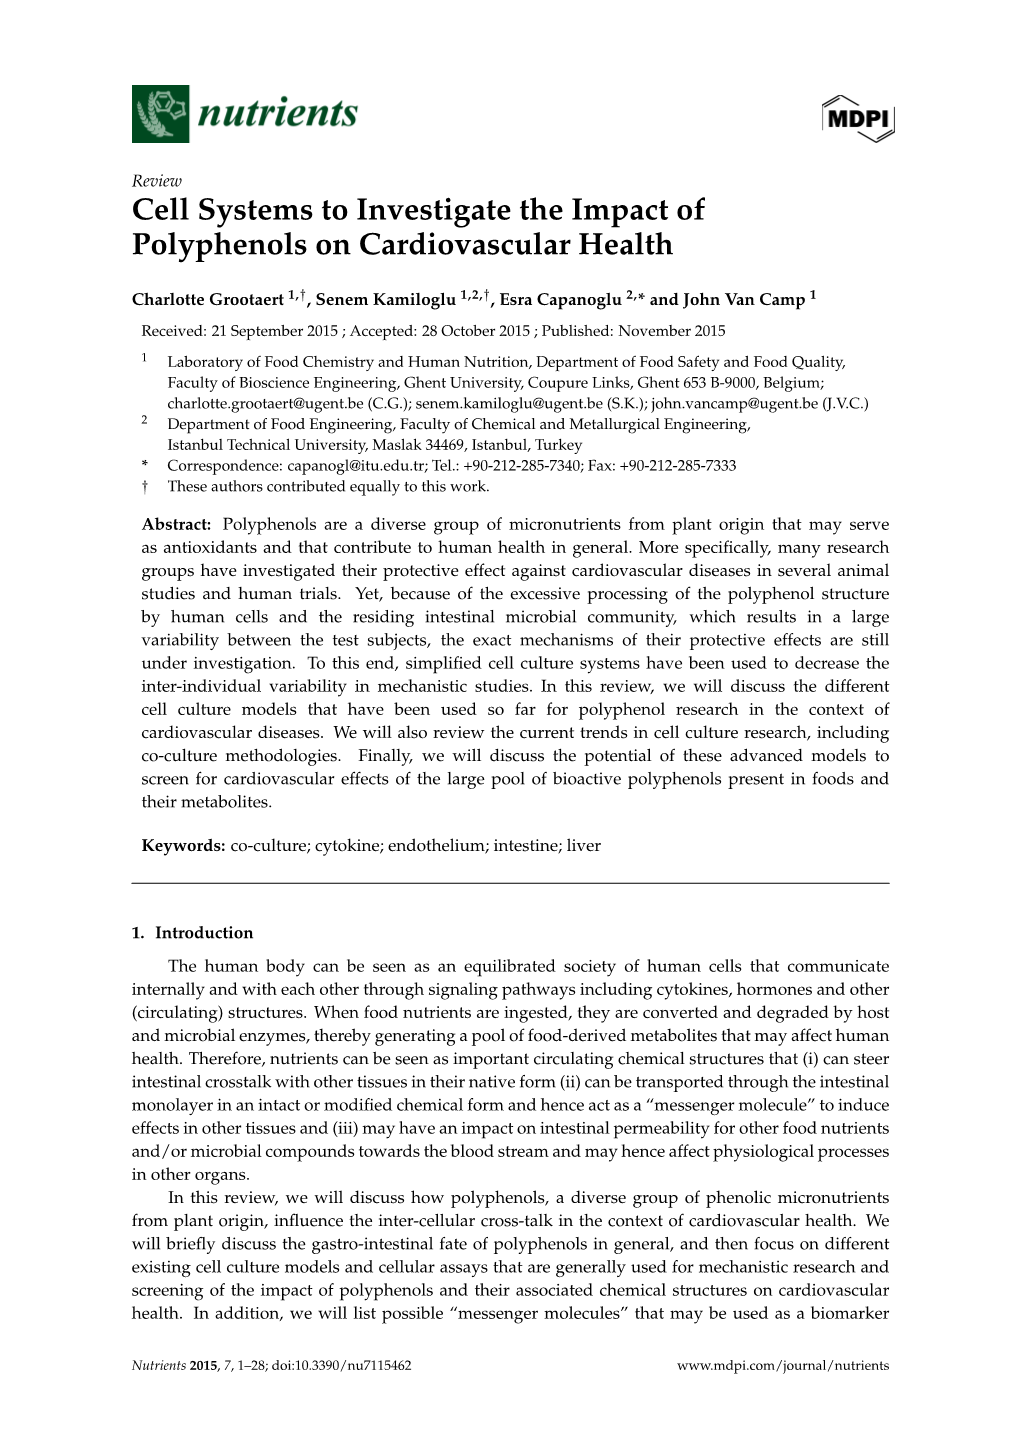 Cell Systems to Investigate the Impact of Polyphenols on Cardiovascular Health